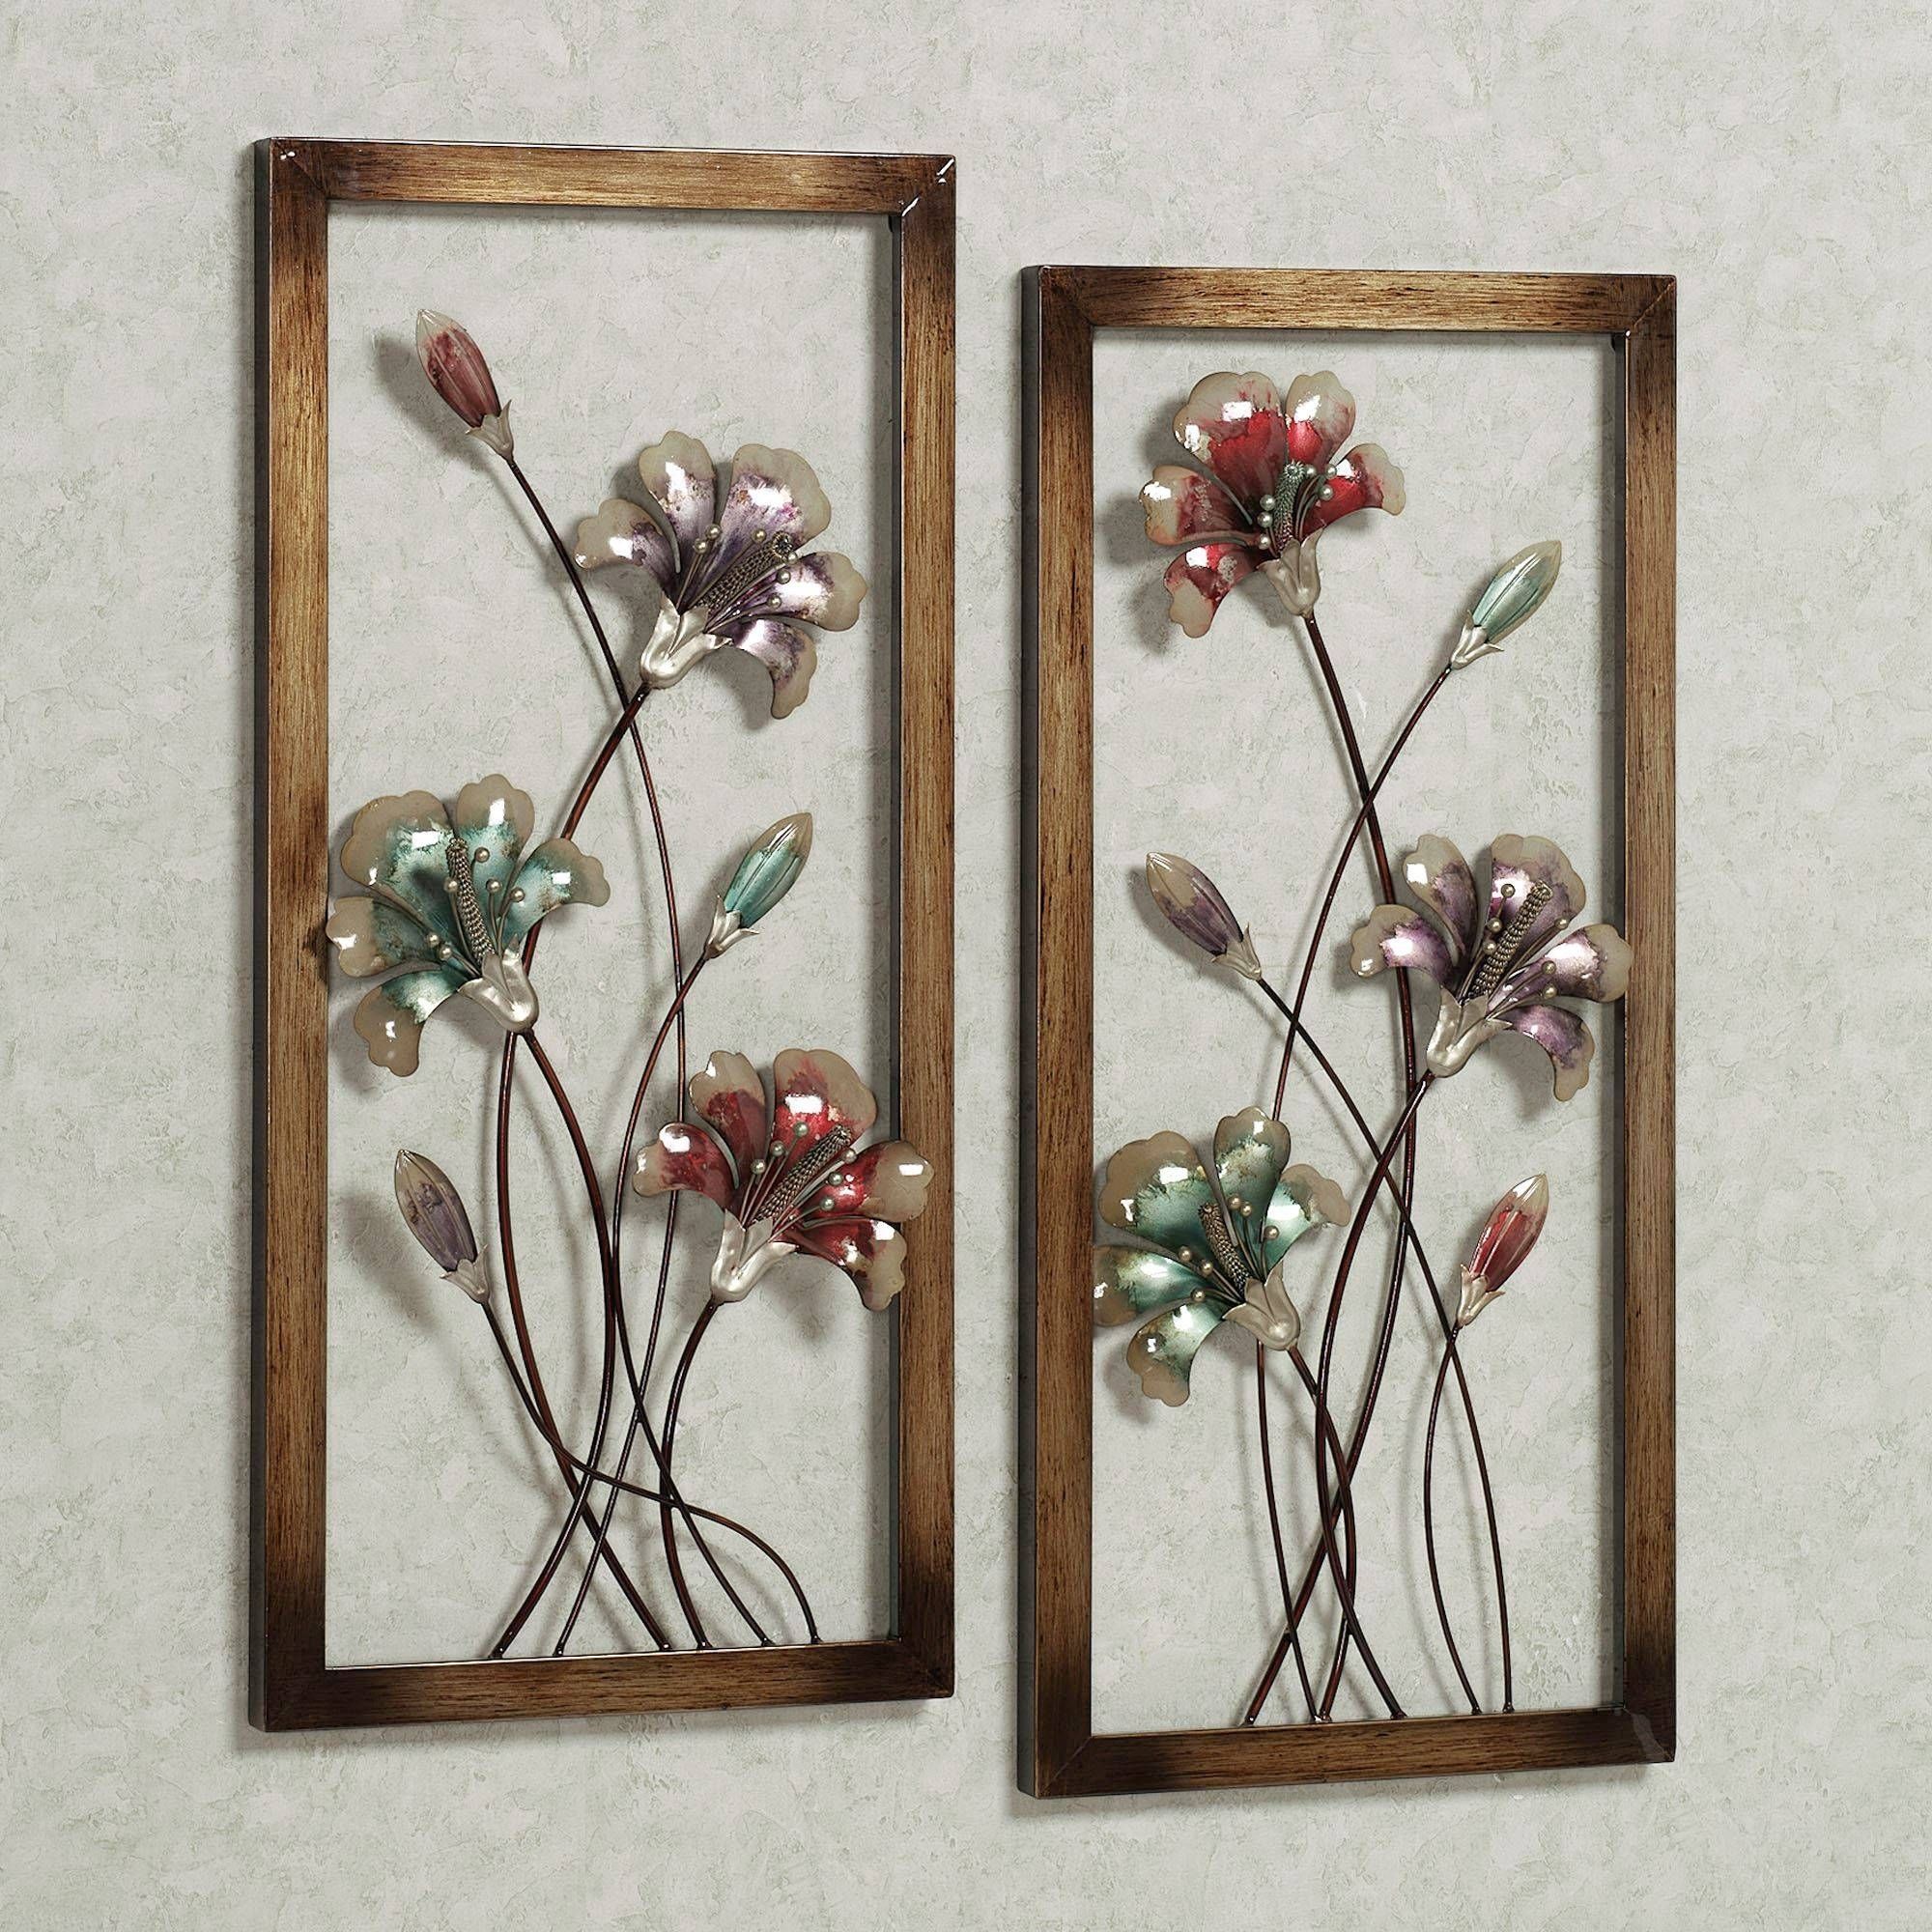 Garden Whispers Floral Metal Wall Art Panel Set Pertaining To Most Up To Date Metal Wall Art Panels (Gallery 19 of 20)